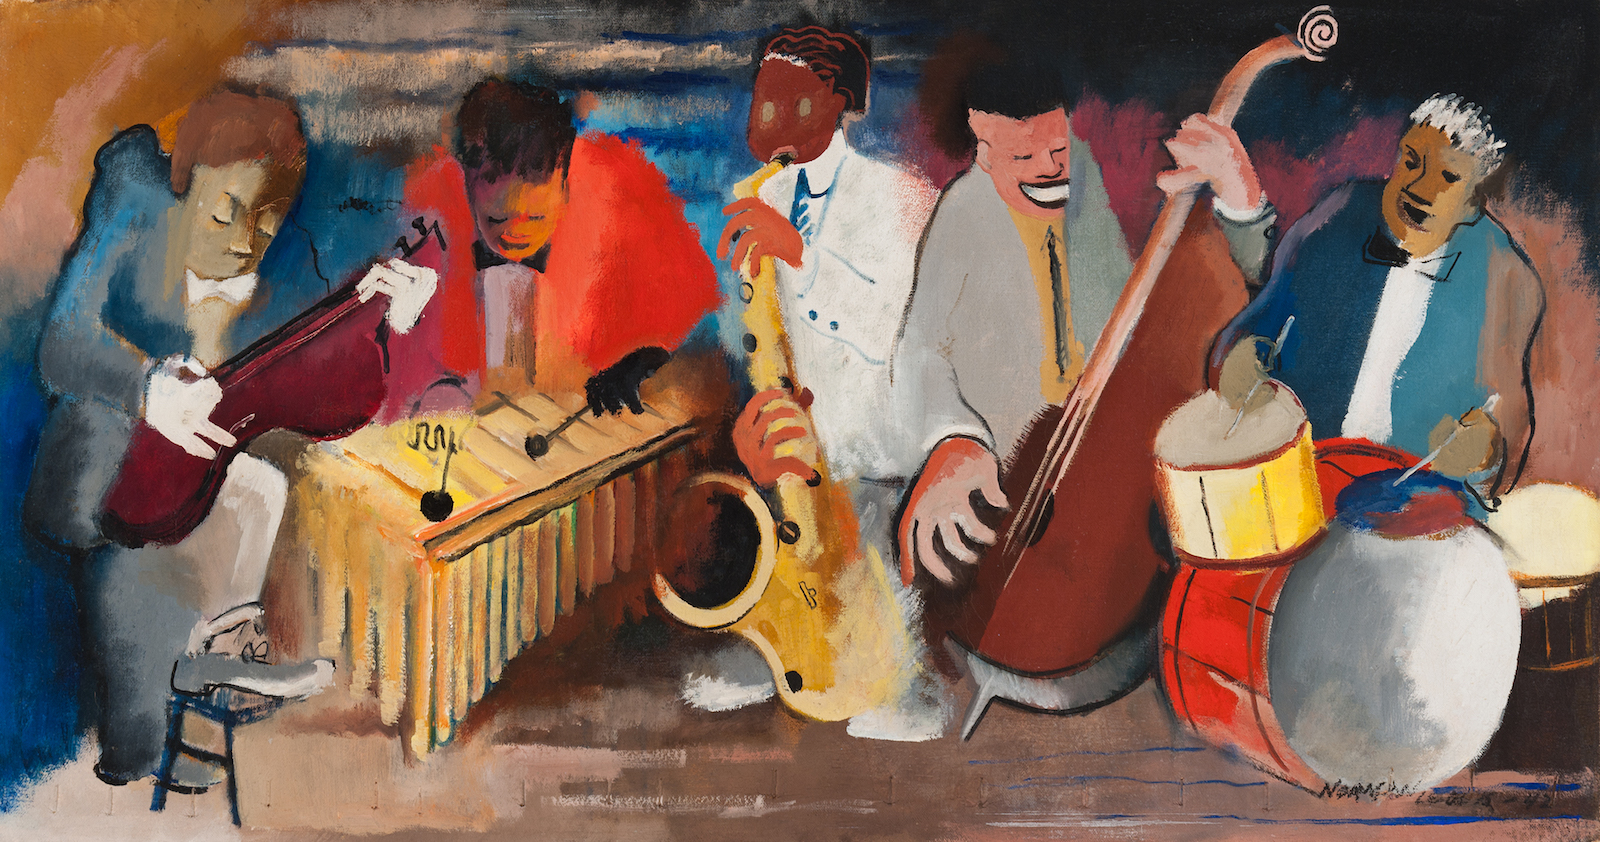 Norman Lewis, Jumpin’ Jive, 1942 Oil on canvas, 16 1/8” x 30” Michael Rosenfeld Gallery, New York